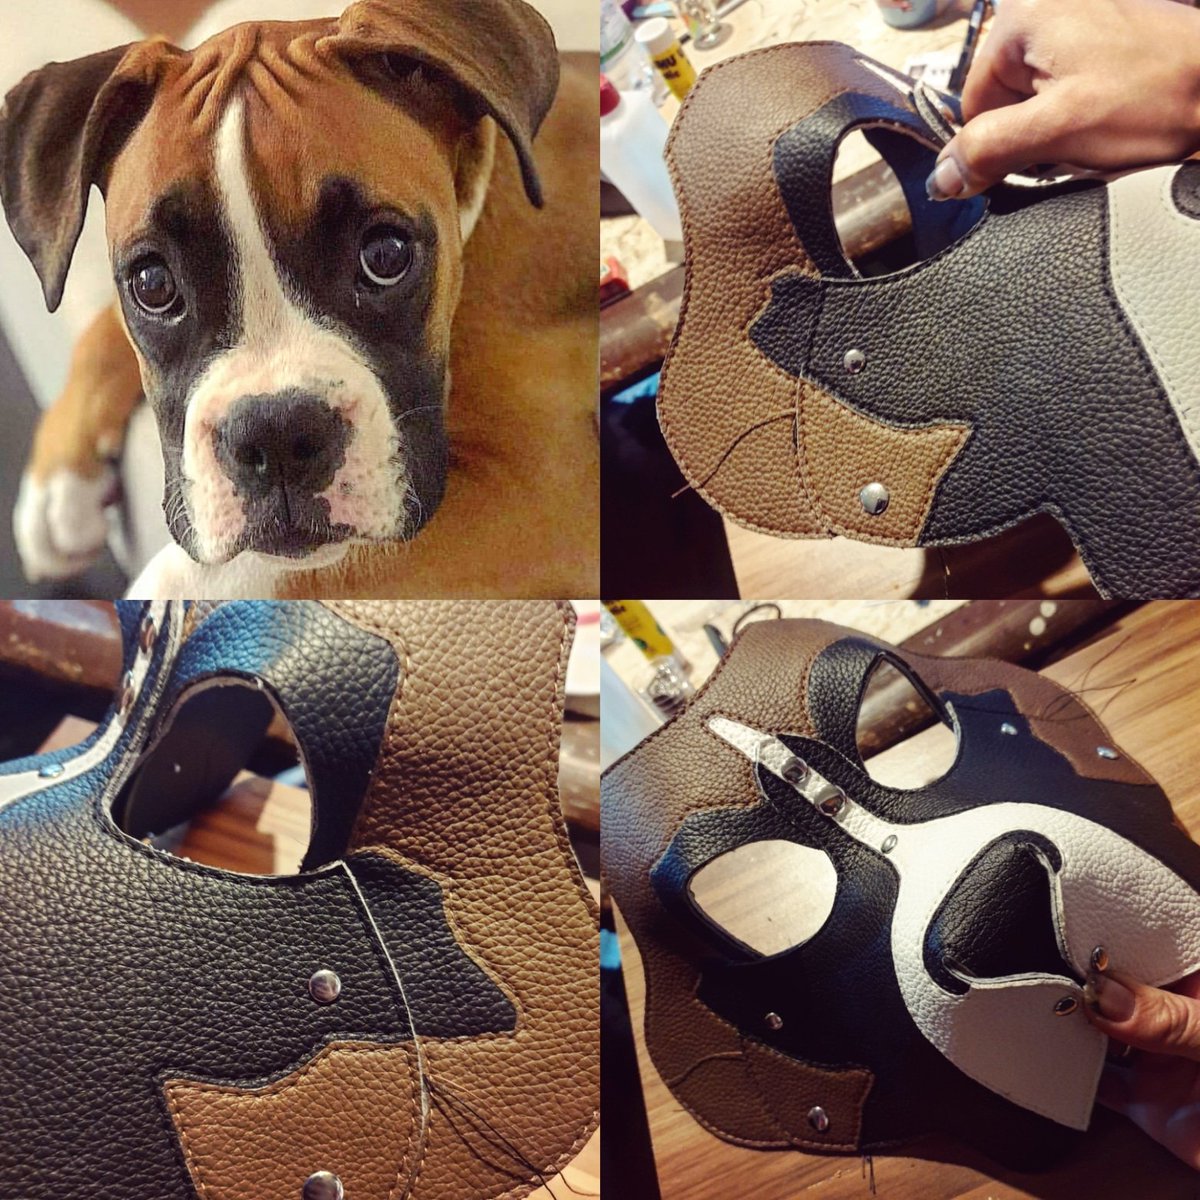 A few WIP pictures!
Making a cute Vegan Boxer pup for @ boxerpuppapi (from instagtam) 🌱💜🦴

#boxermask #puppyhood #boxerhood #customhood